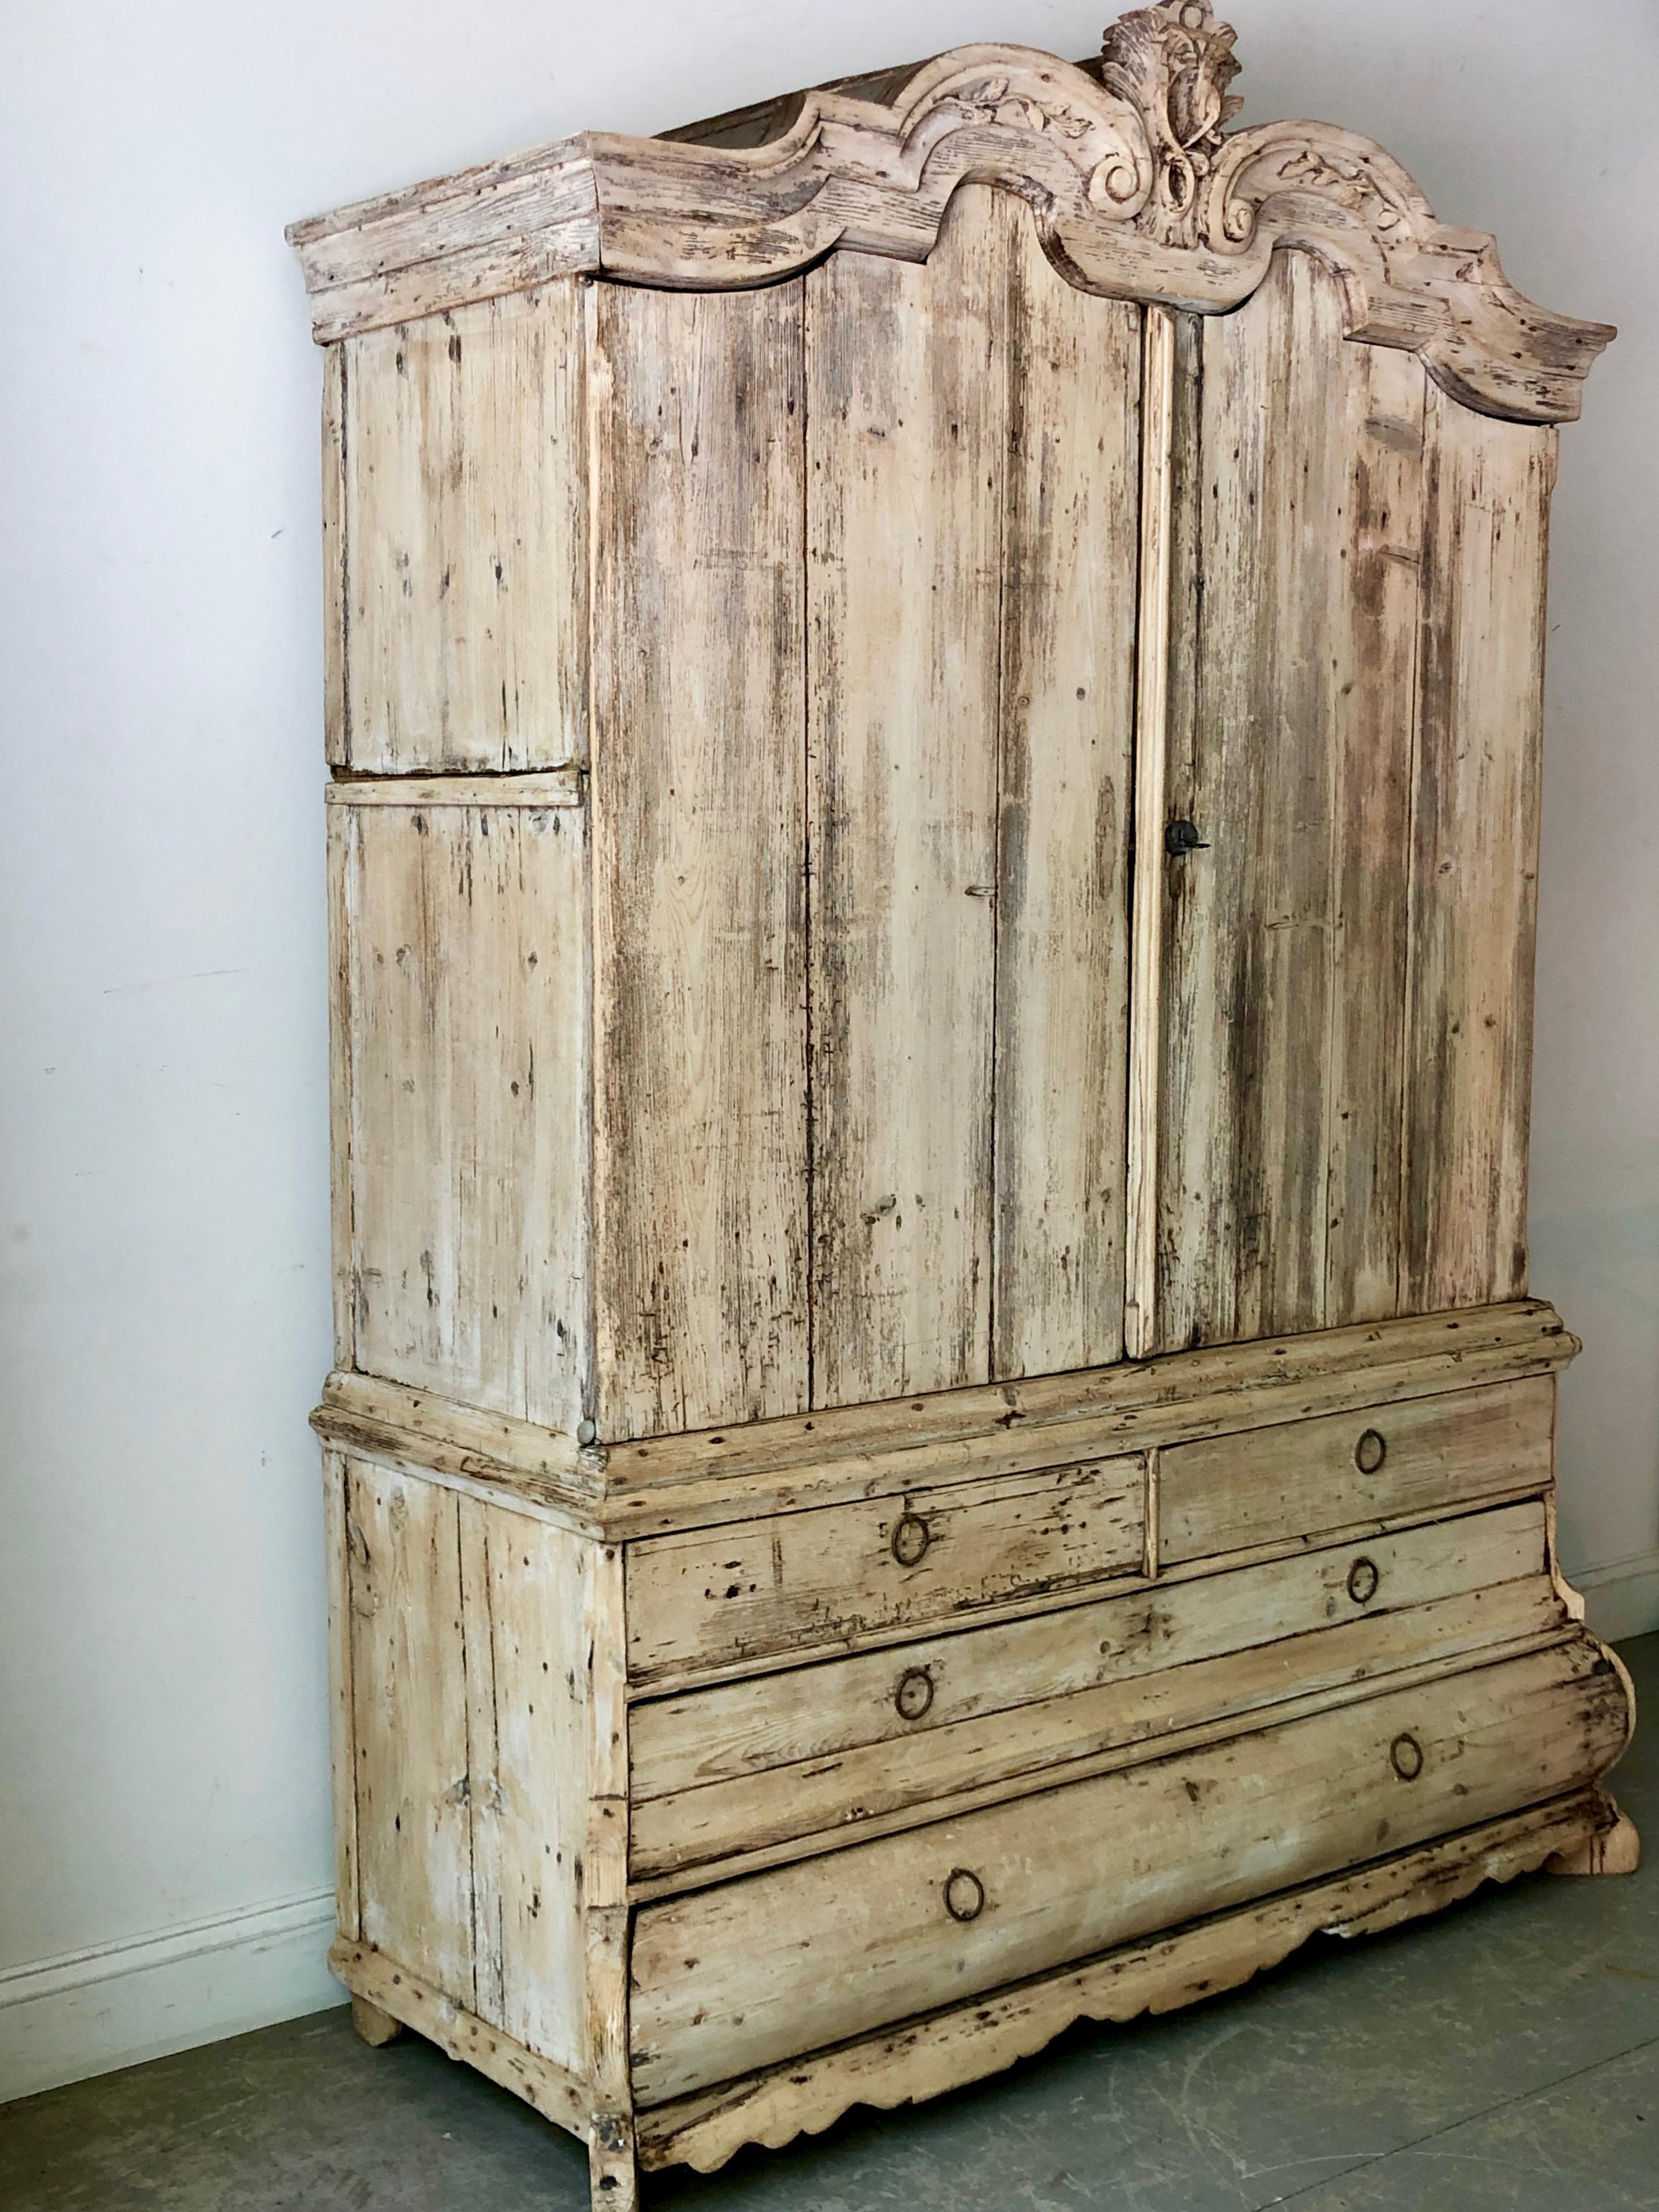 18th century Dutch beached oak two-piece cabinet with bonnet shaped pediment with delicate flower carvings,. The upper cabinet sits atop four bombé drawers with calloped skirt and carved feet.